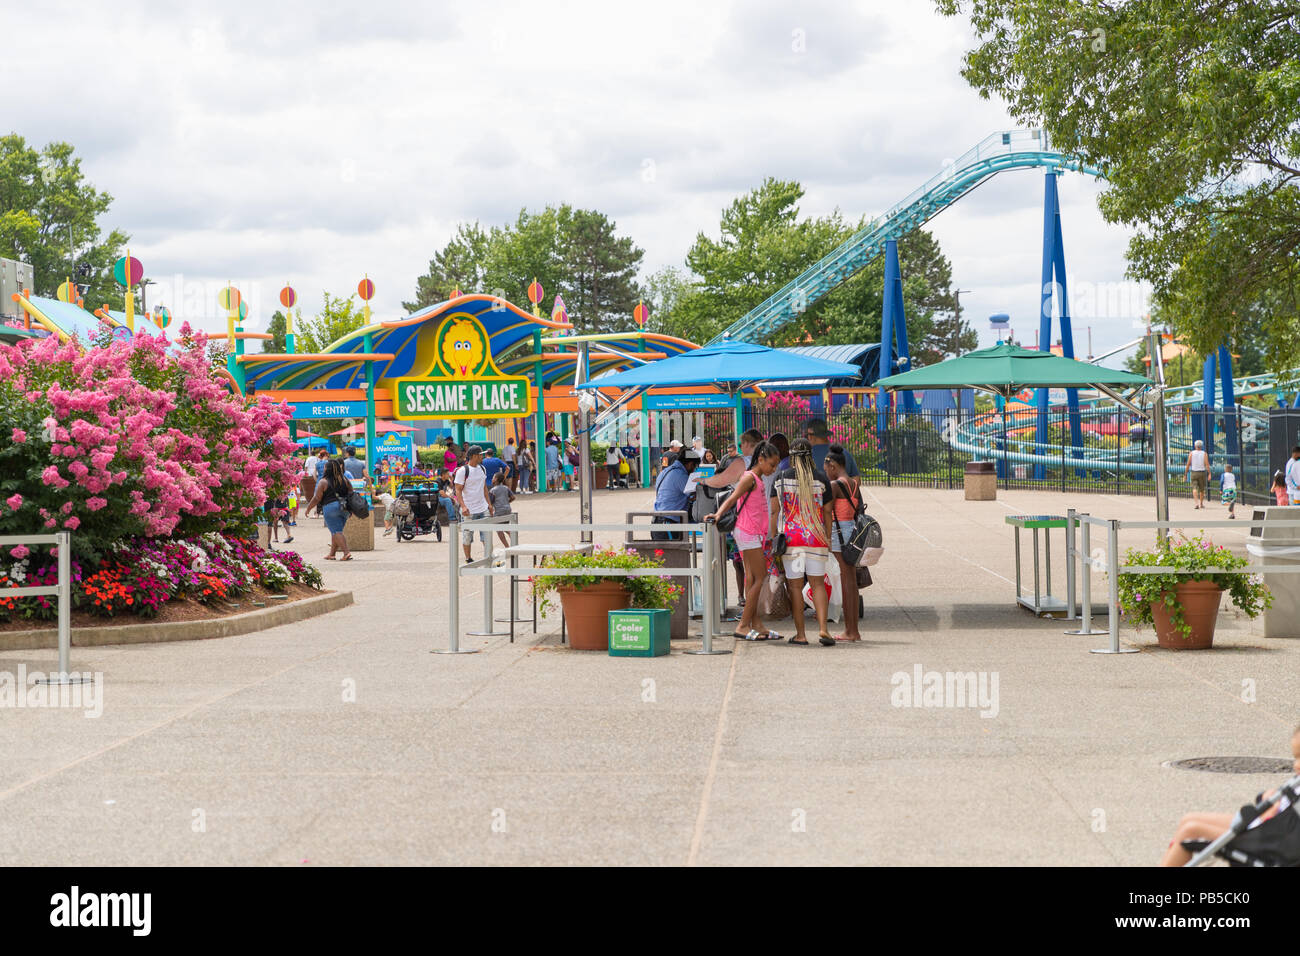 Langhorne, PA July 21, 2018: Sesame Place is a children's theme park, located on the outskirts of Philadelphia, Pennsylvania based on the Sesame Stree Stock Photo